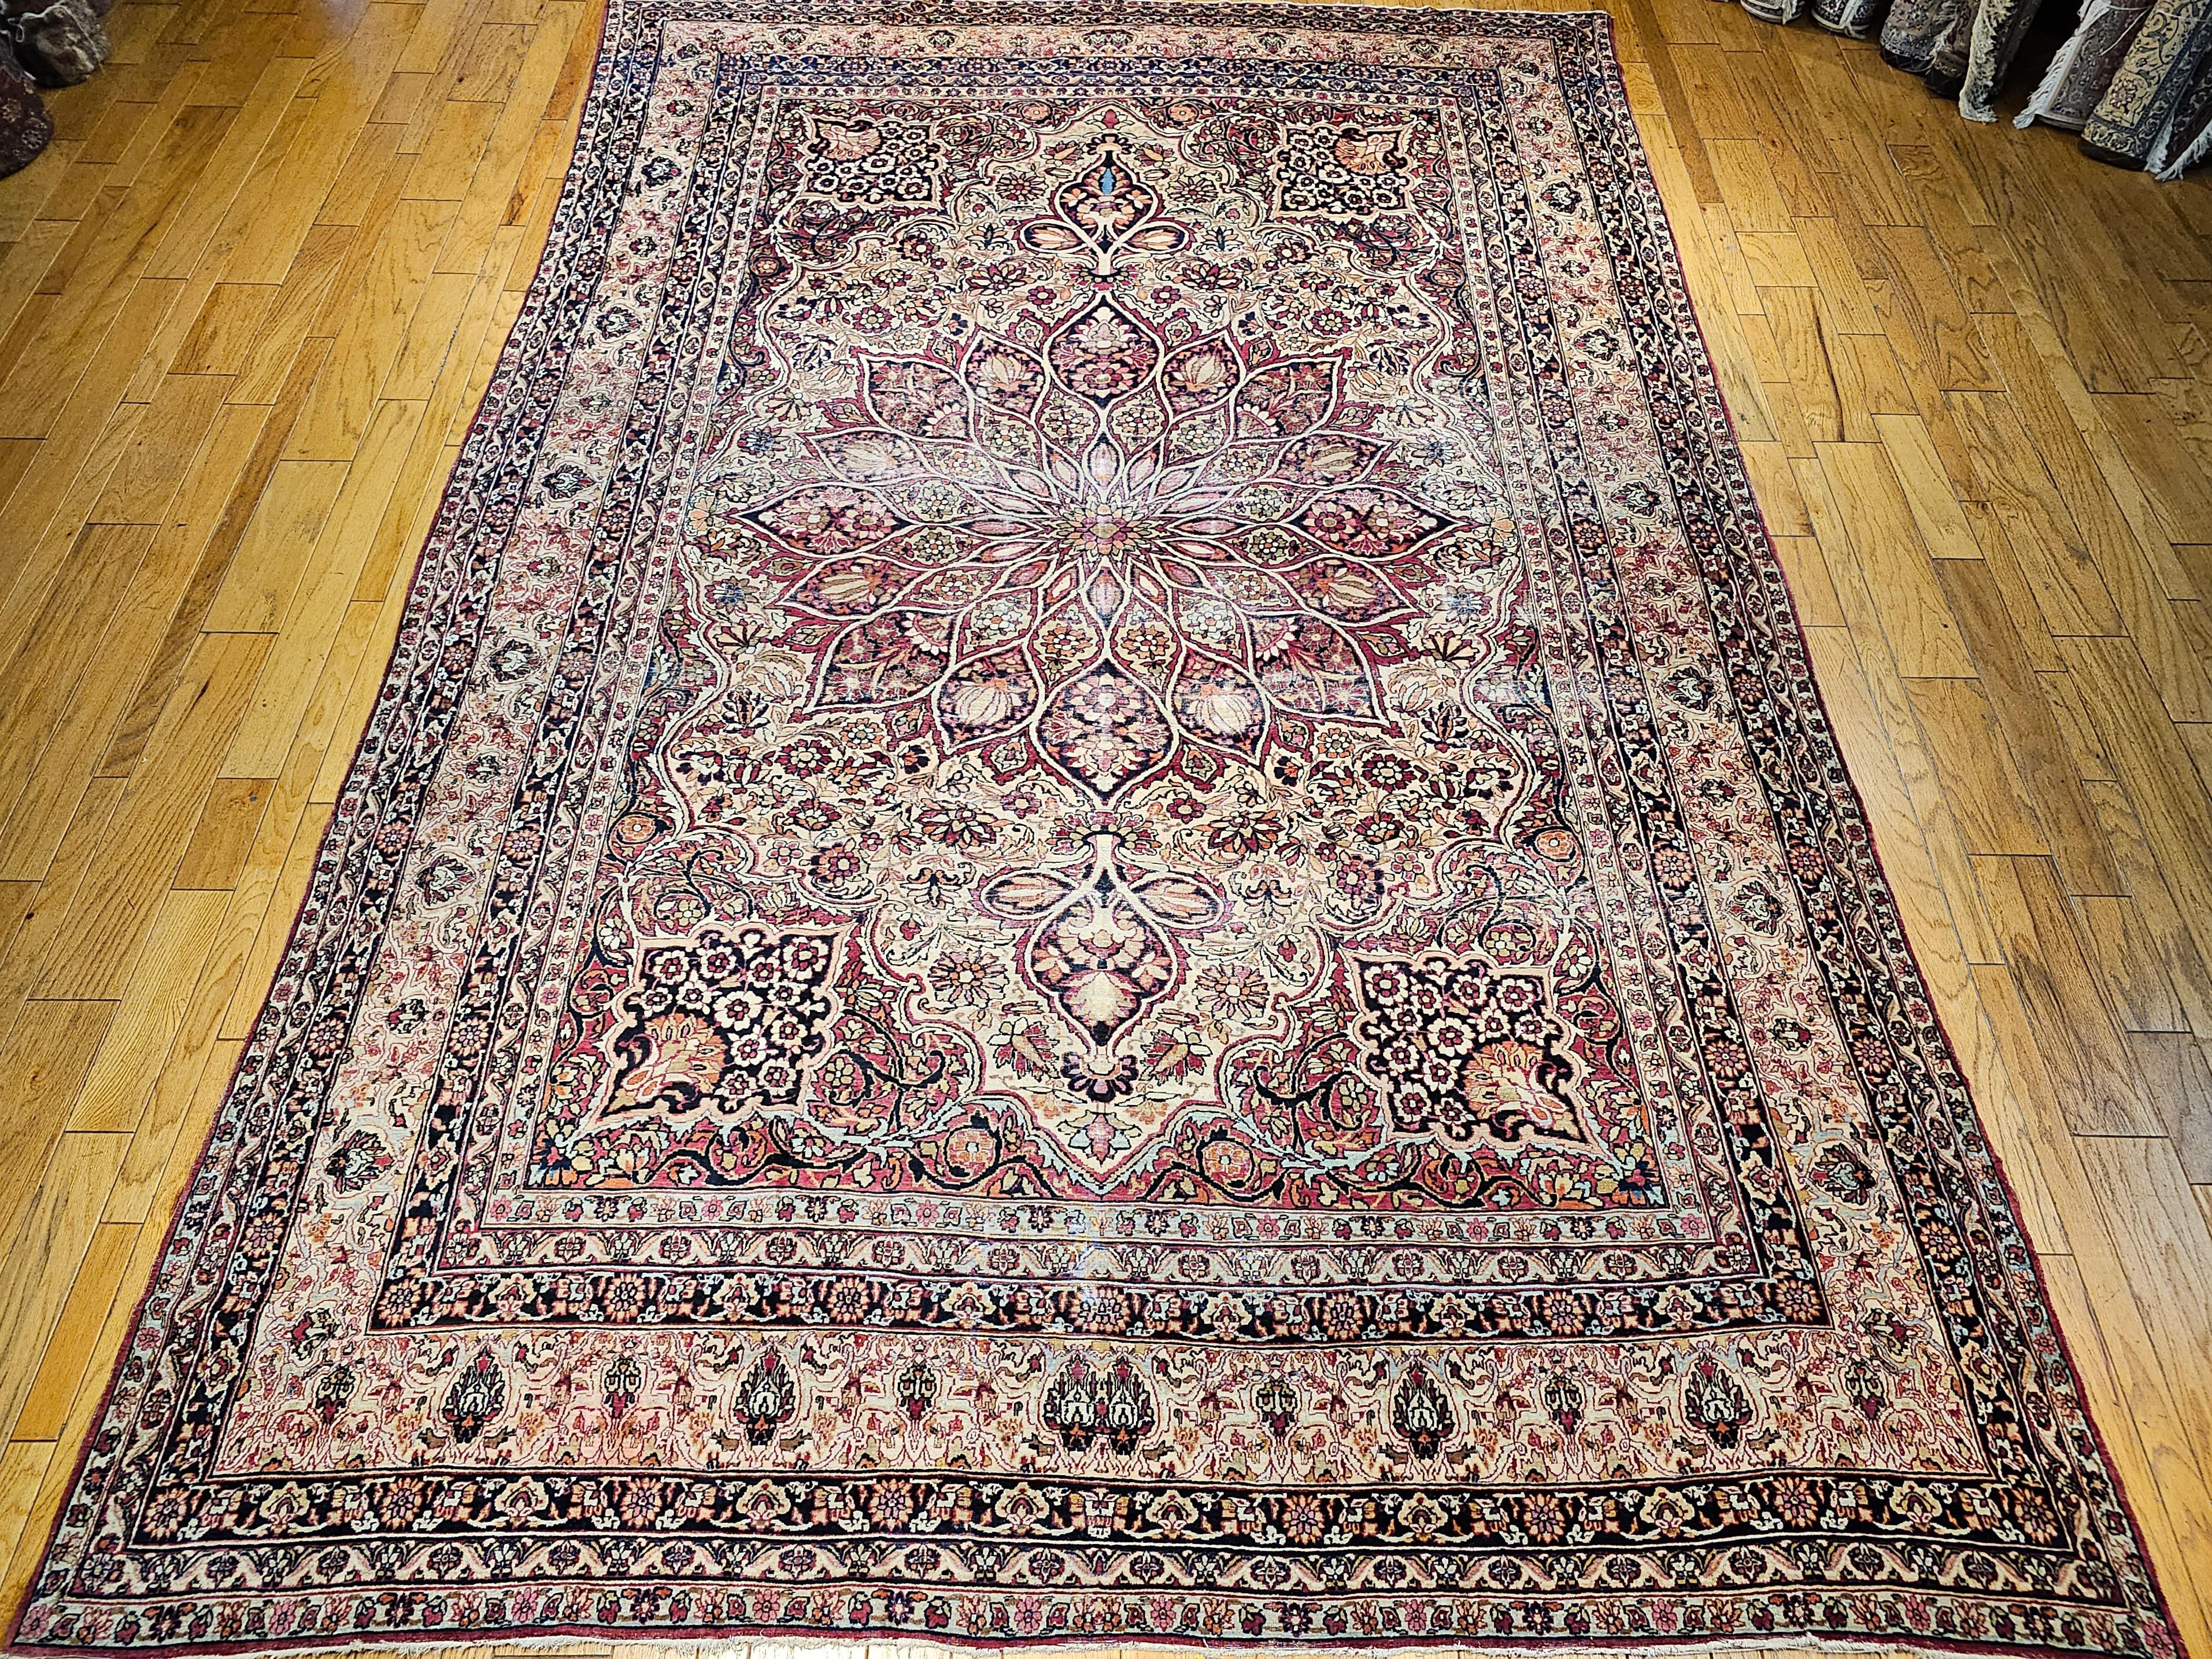 A beautiful oversized Persian Kerman Lavar from the 4th quarter of the 1800s.  The Kerman Lavar rug has a central medallion in a very detailed and intricate manner.  The primary color in the field is antique cream with accents of red, turquoise,